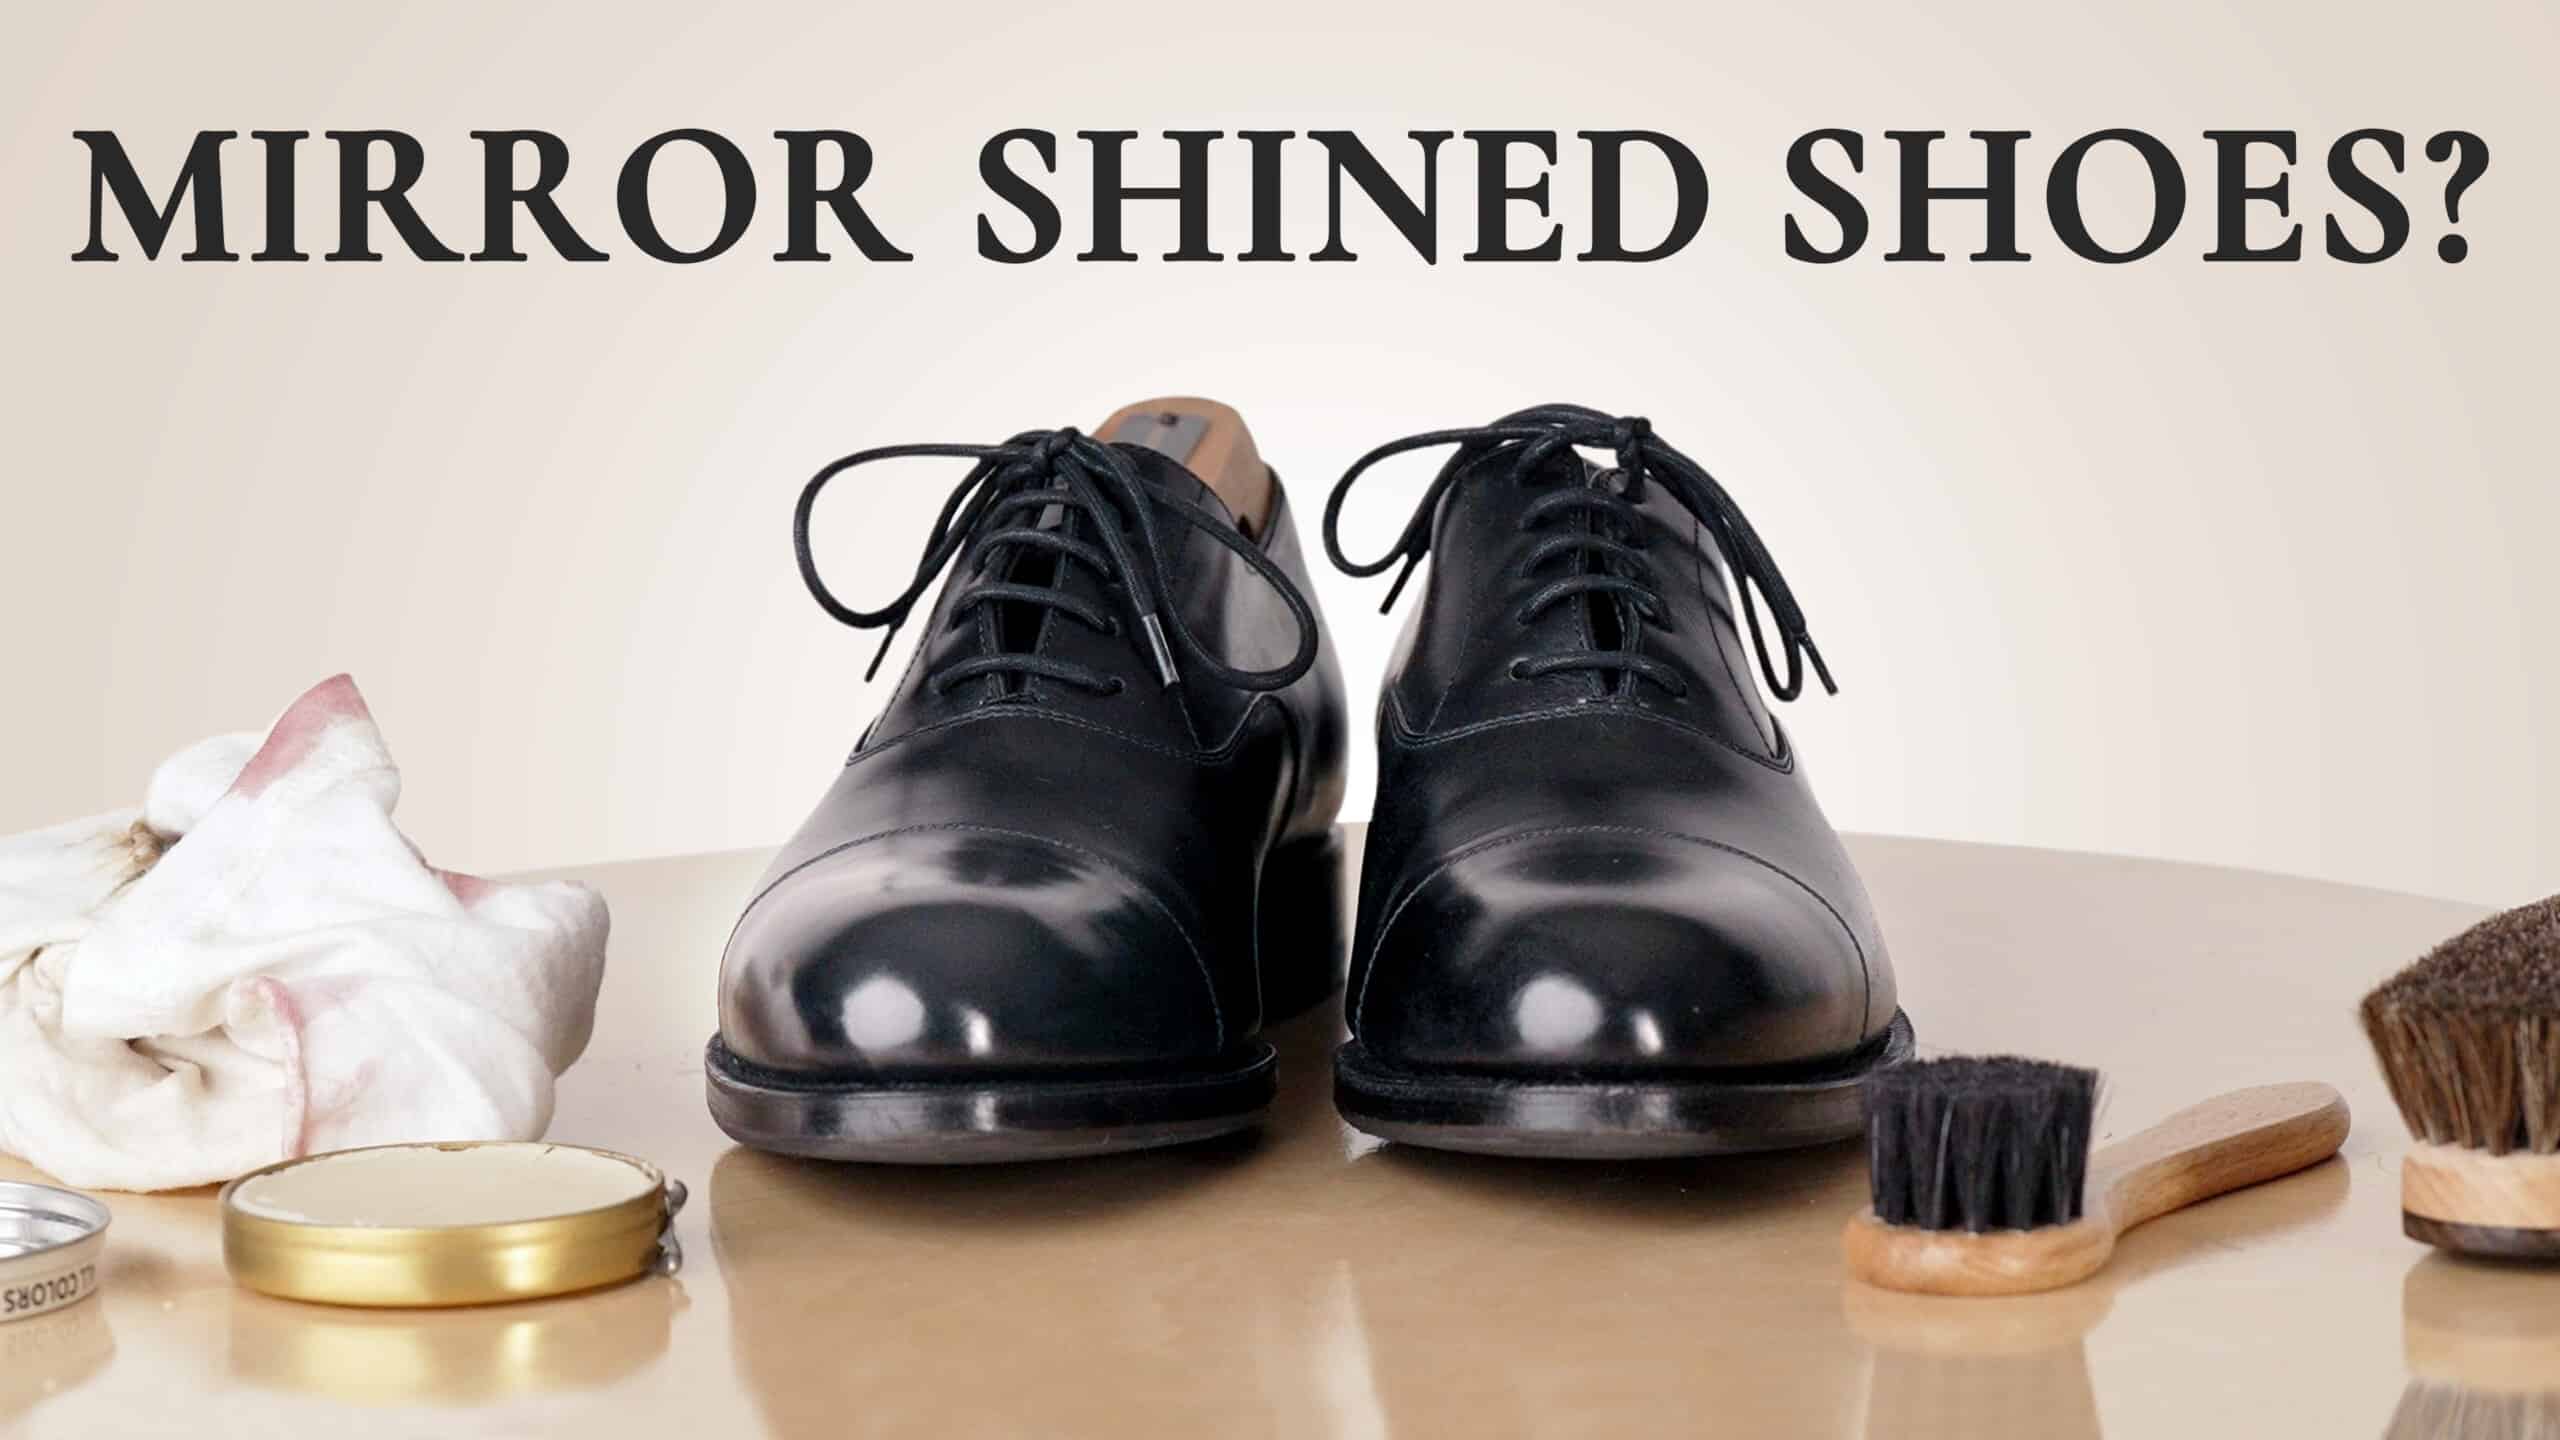 mirror shined shoes 3840x2160 scaled